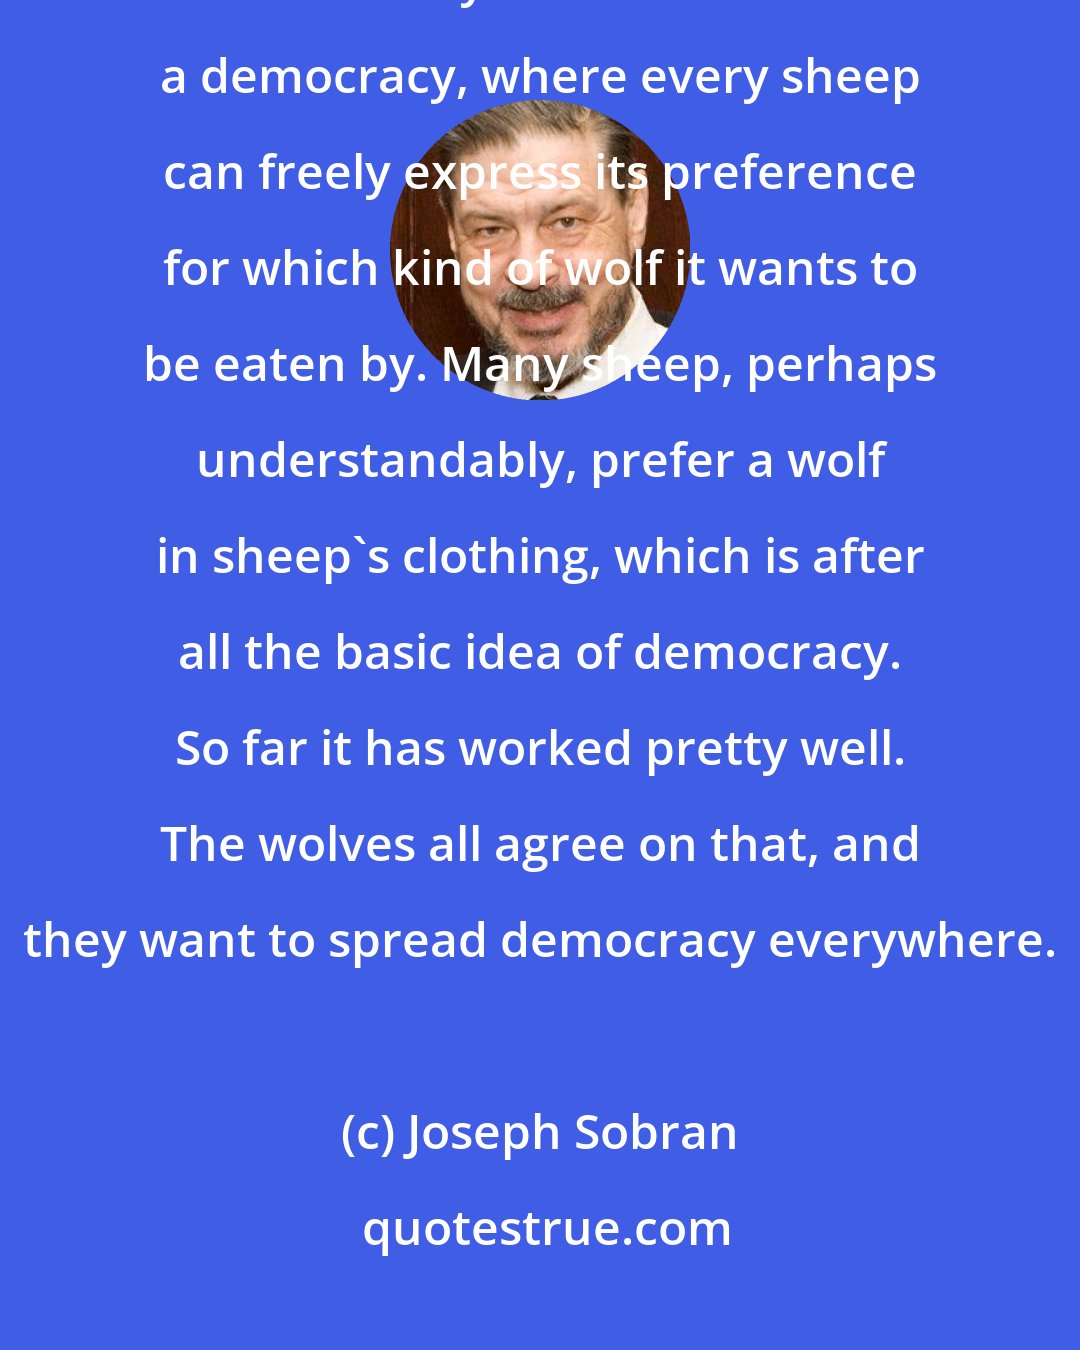 Joseph Sobran: So when the wolf pounces on your lamb, just ignore the pitiful bleating and remind yourself that this is a democracy, where every sheep can freely express its preference for which kind of wolf it wants to be eaten by. Many sheep, perhaps understandably, prefer a wolf in sheep's clothing, which is after all the basic idea of democracy. So far it has worked pretty well. The wolves all agree on that, and they want to spread democracy everywhere.